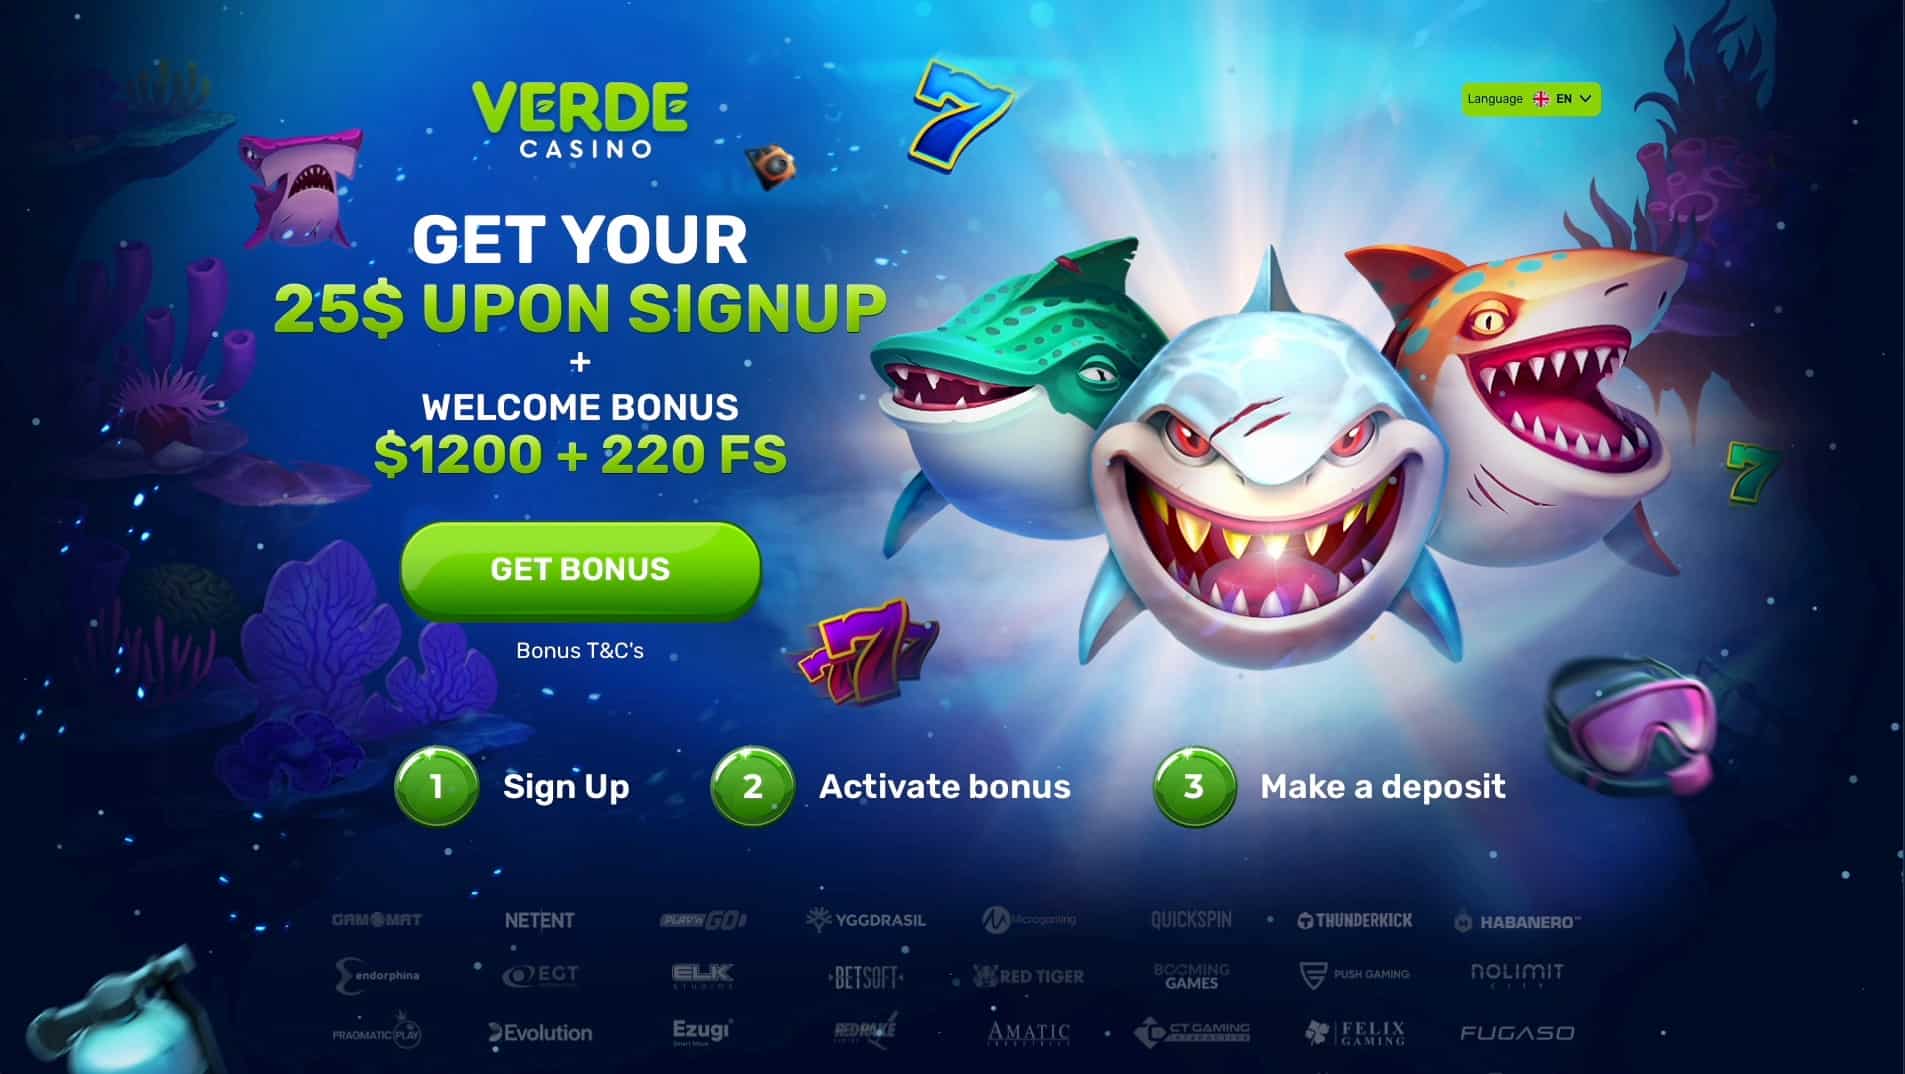 No deposit offer page at Verde Casino